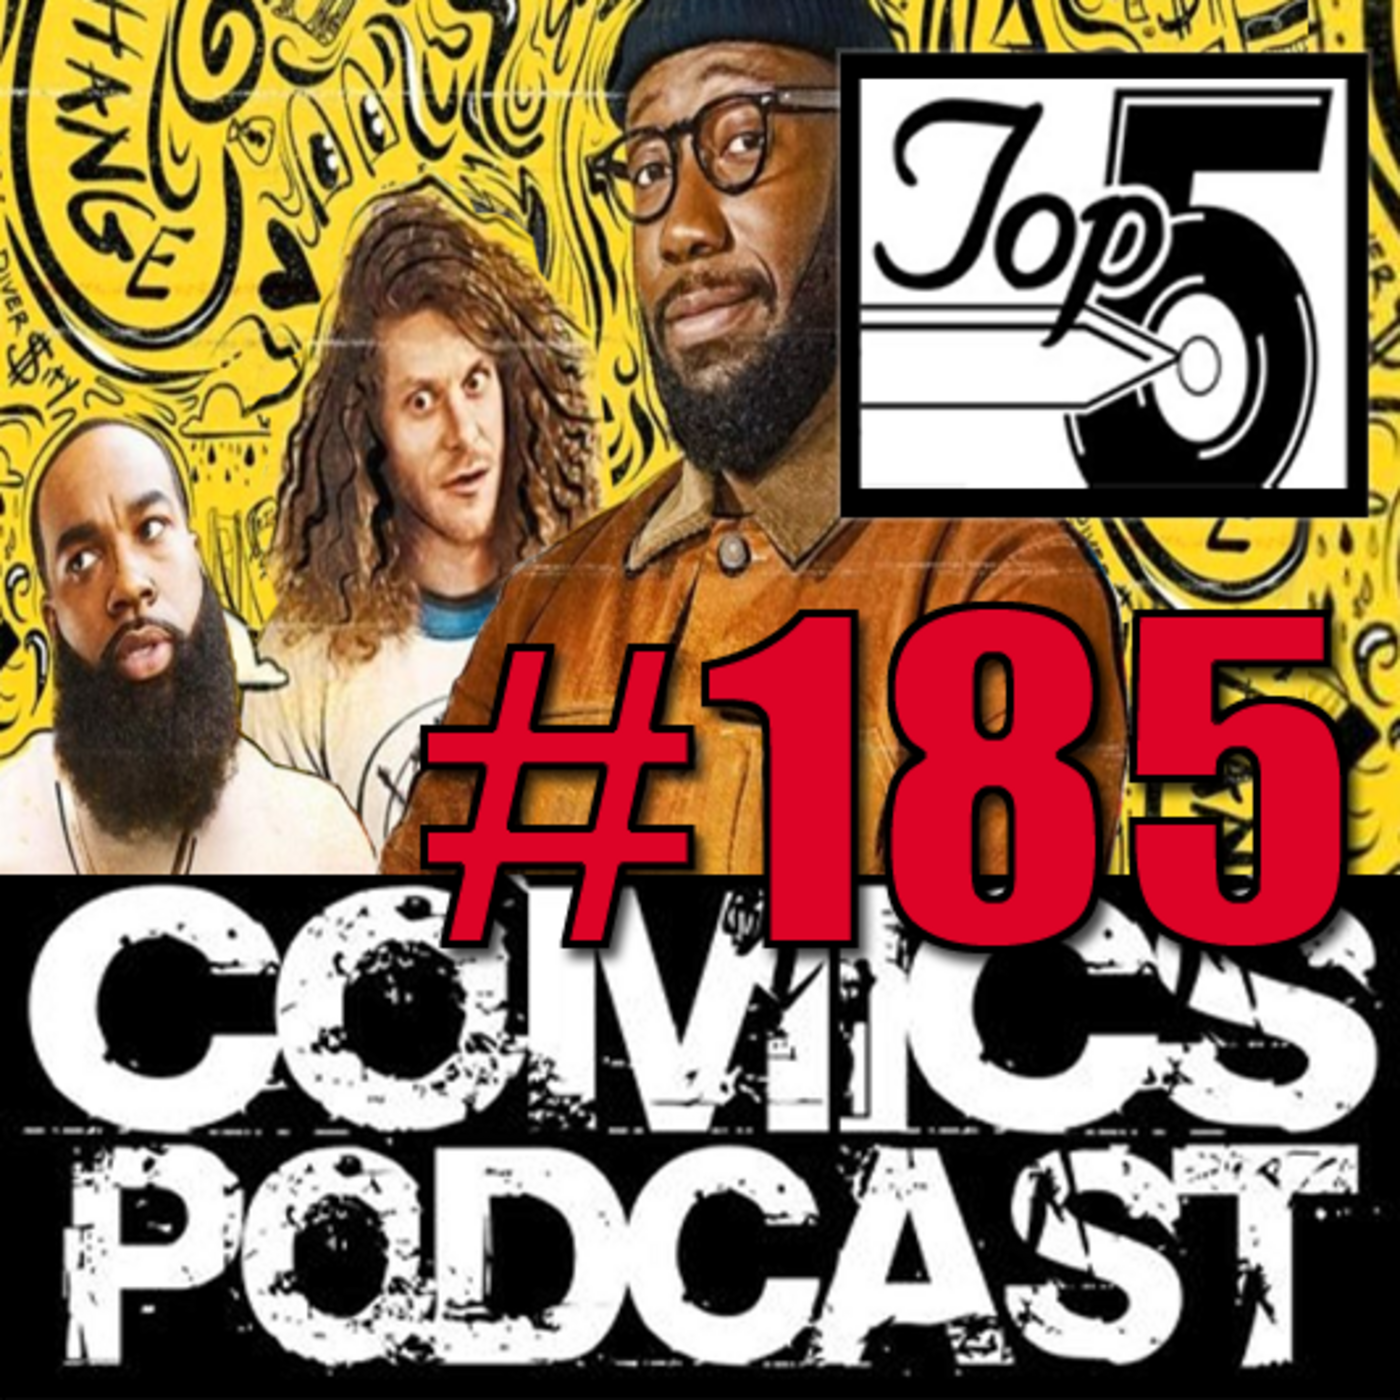 Episode 185: Top 5 Comics Podcast - Episode 185 - Top 5 Comics Picks of the Week and Woke TV Show from @ Wonder Con